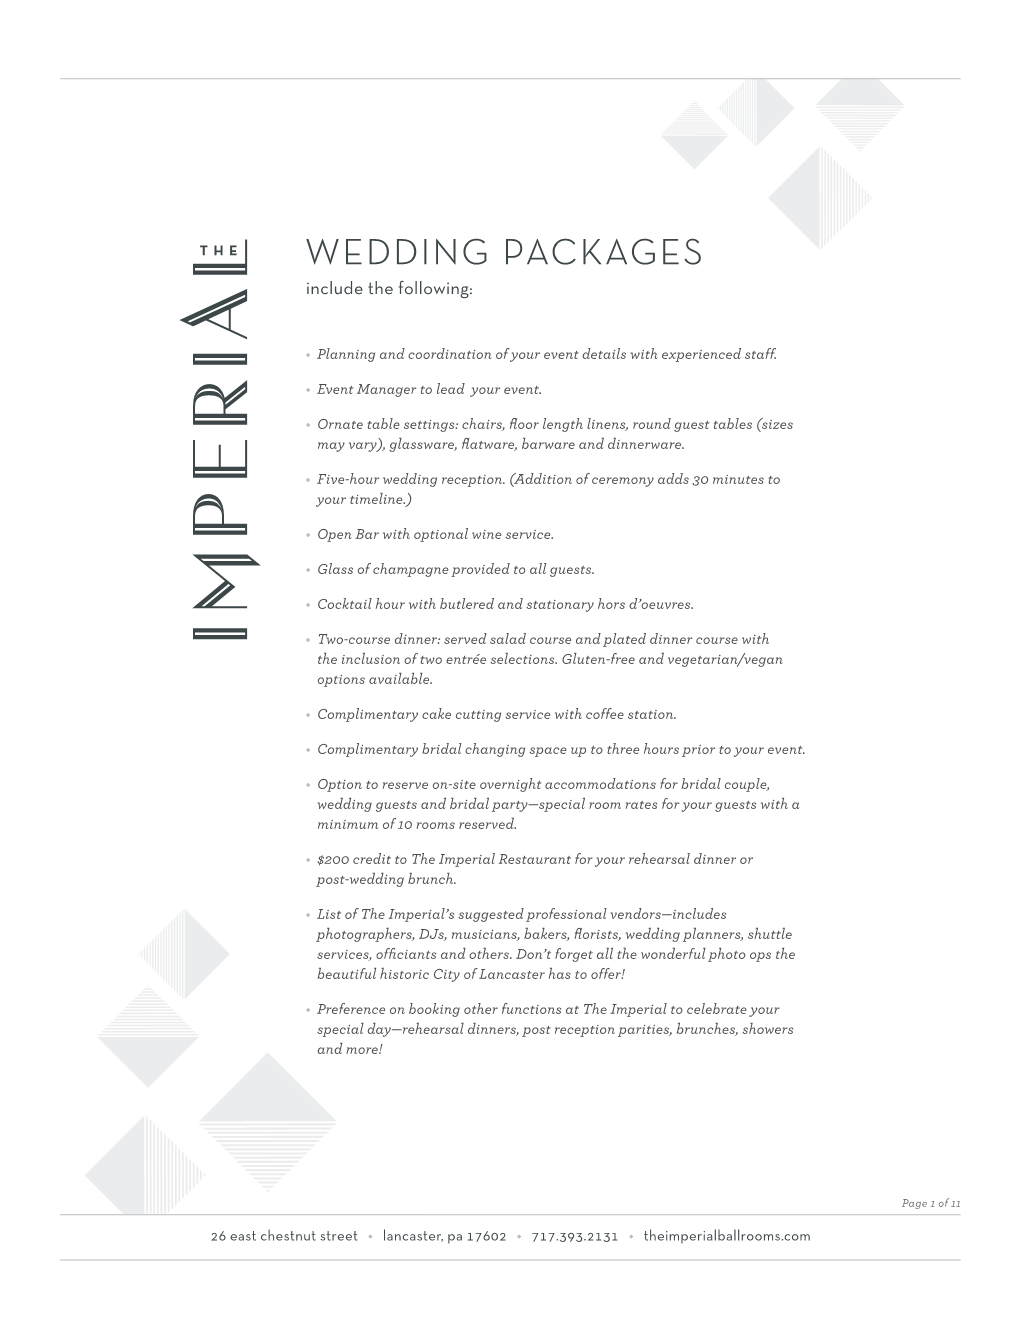 Wedding Packages Include the Following